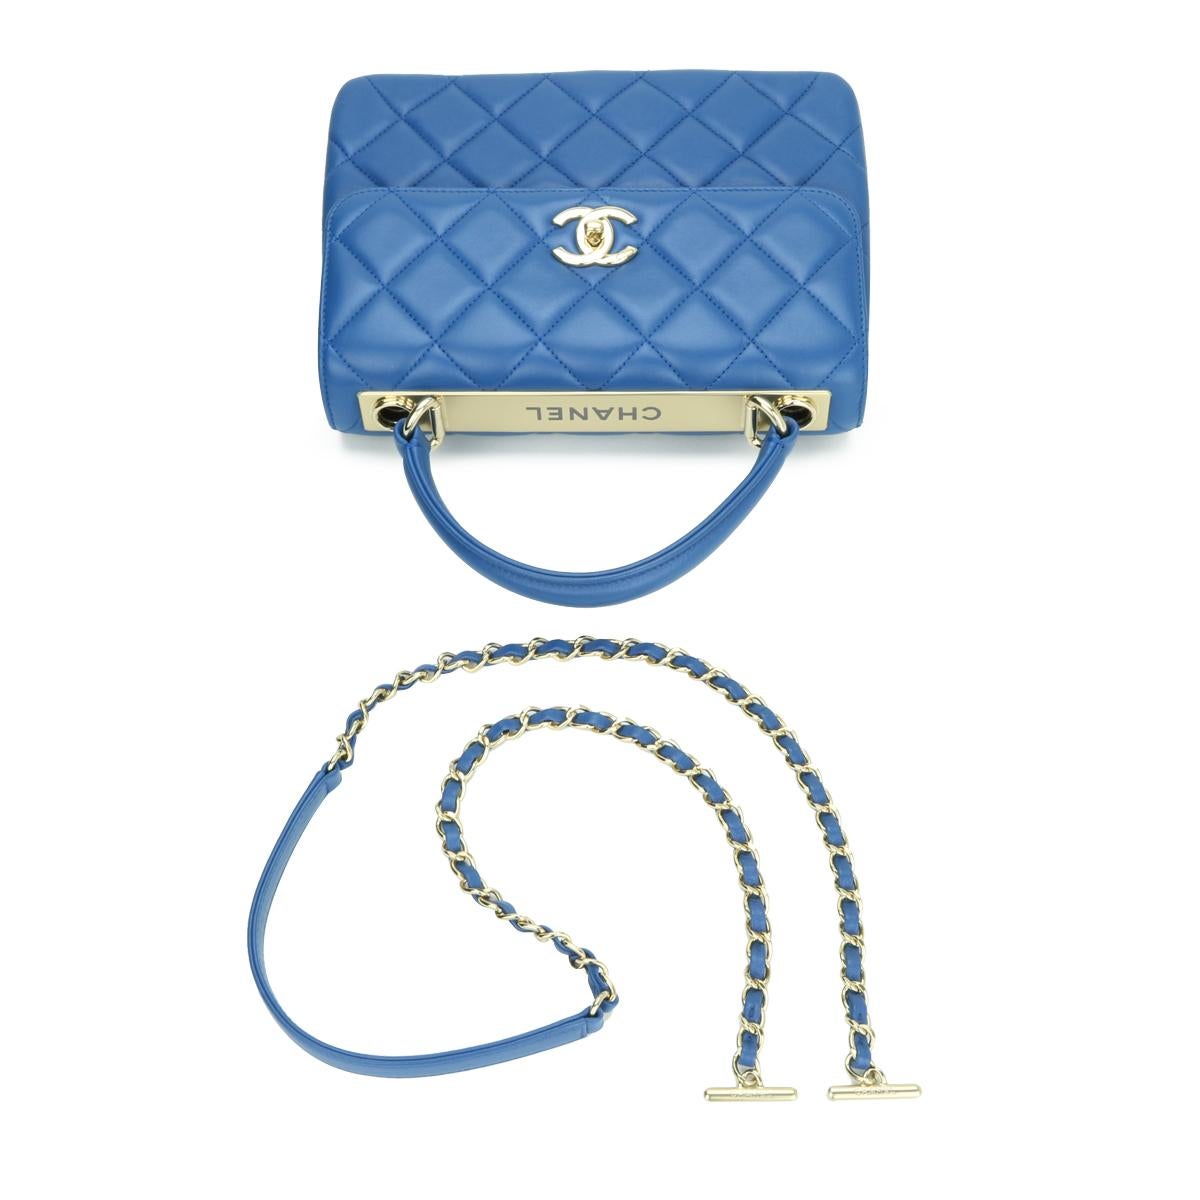 CHANEL Trendy CC Bag Small Blue Lambskin Light Gold Hardware 2019 For Sale 7